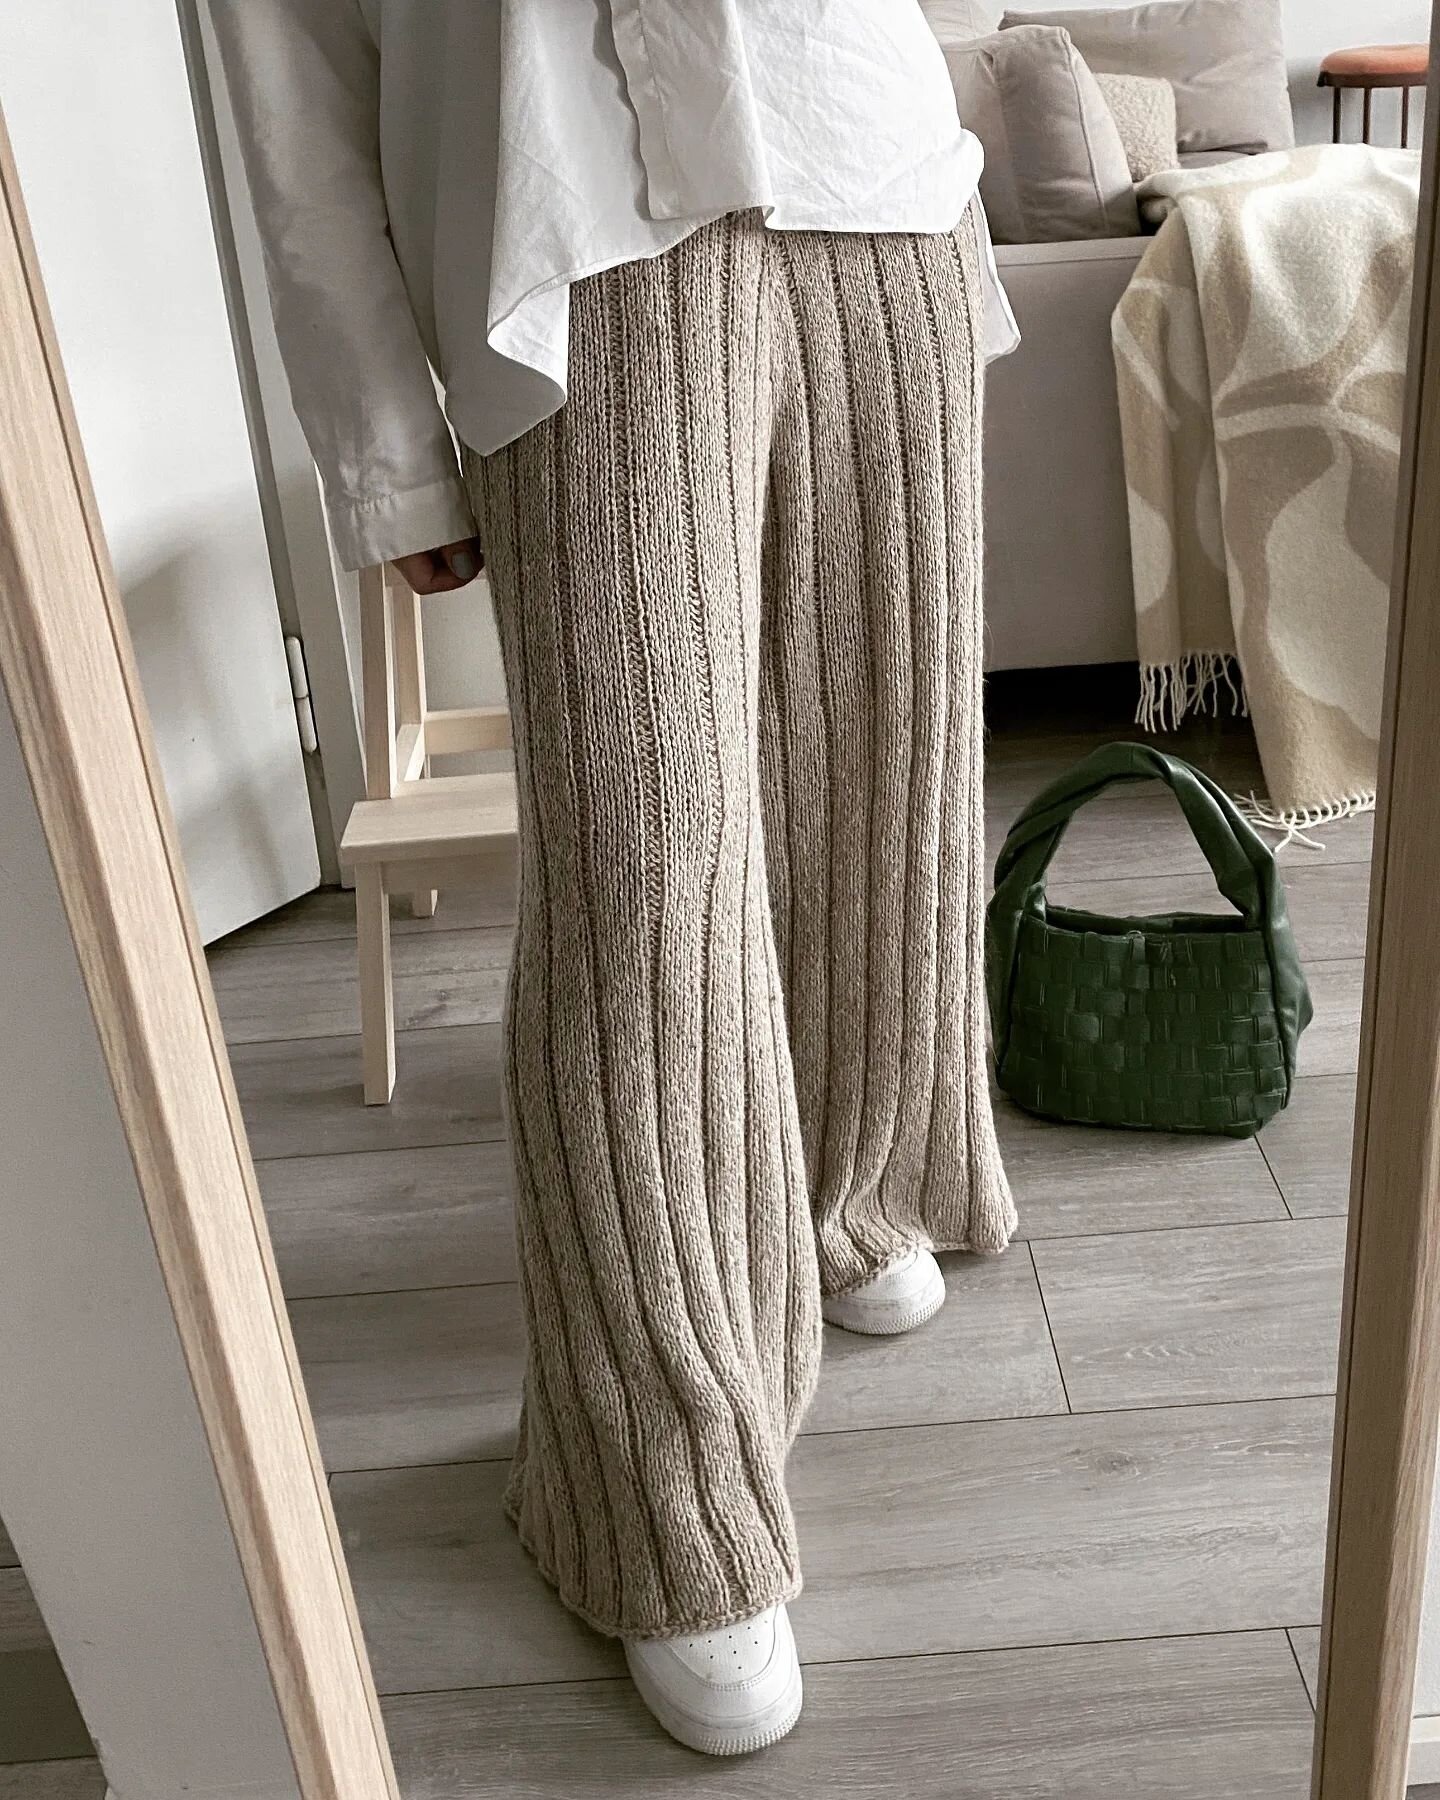 🤍LORI PALAZZOS🤍

A labour of love,
THE knitted trousers,
extra cozy, yet classy💄

PATTERN:
#loripalazzos available at
www.coknitwear.com